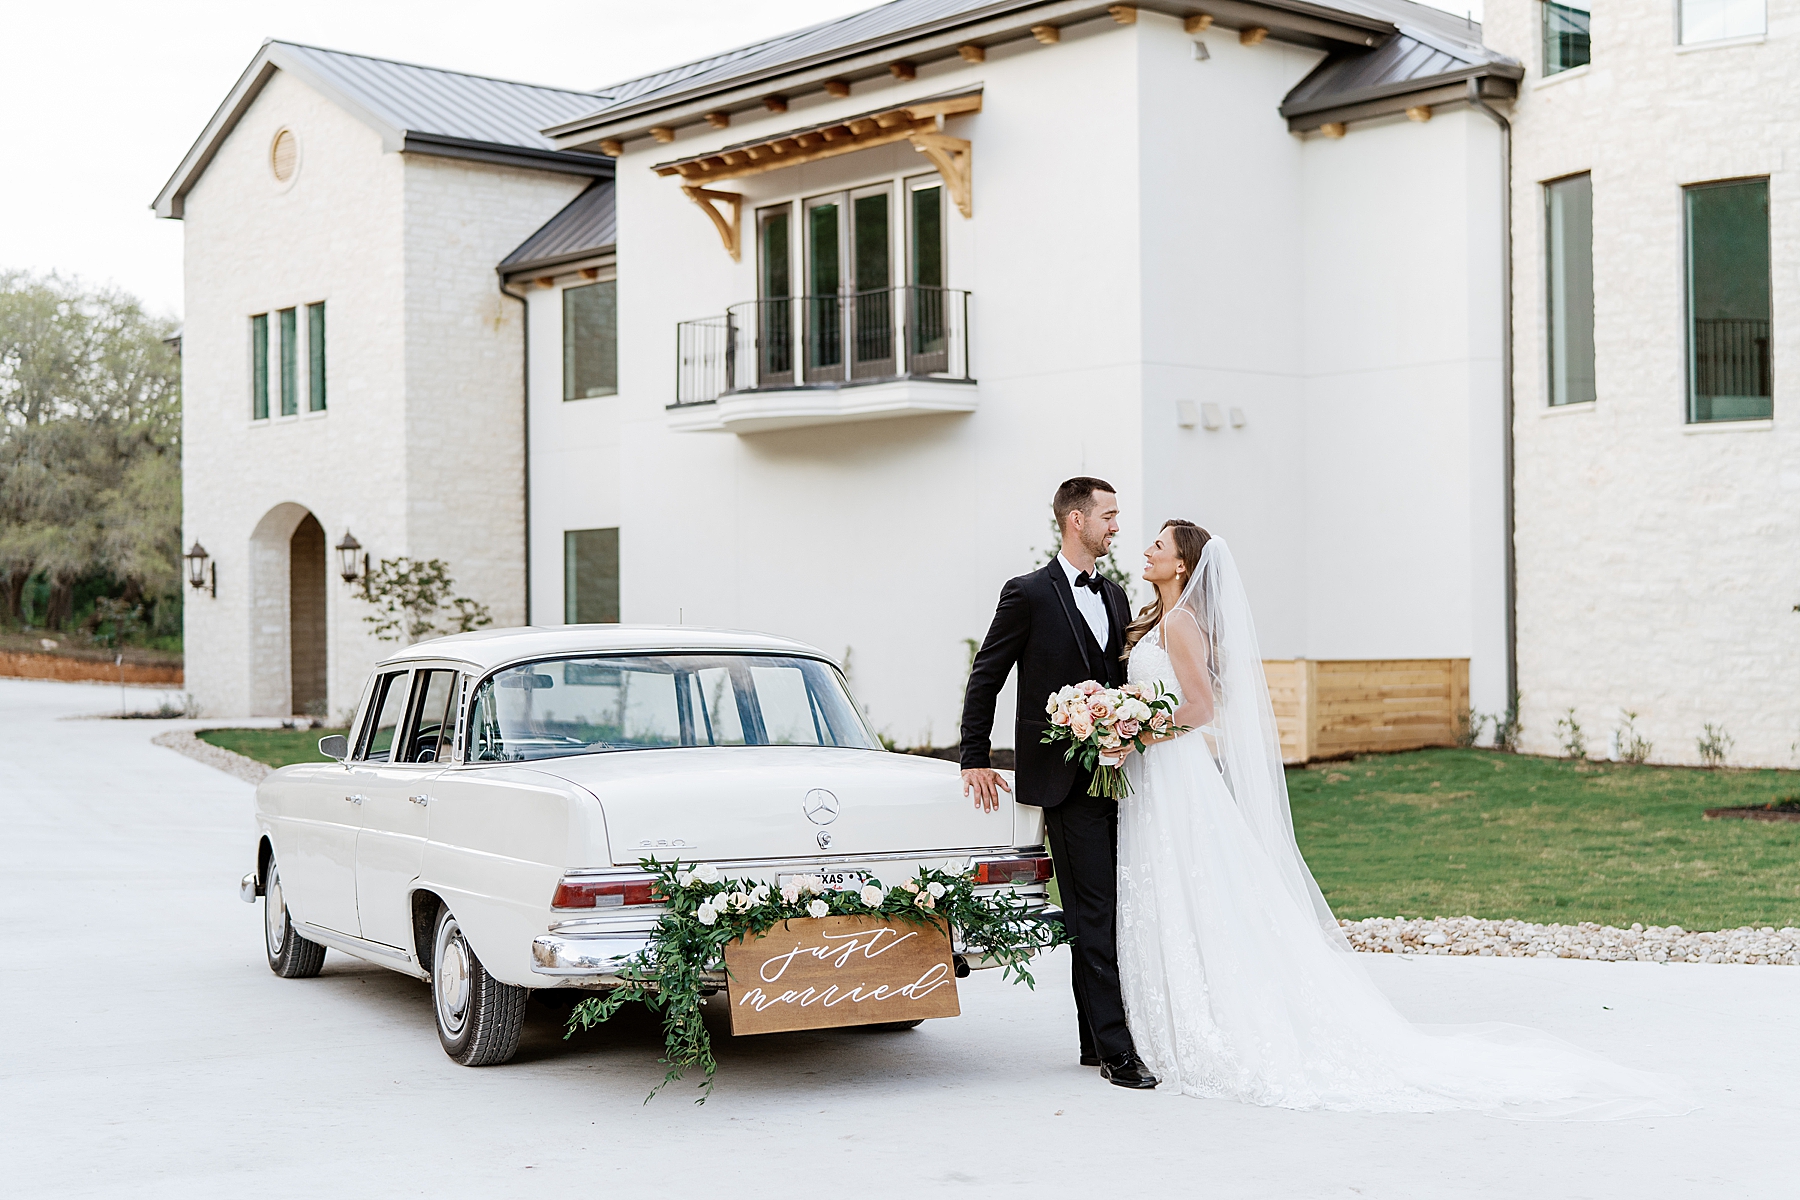 Couples portraits with vintage car at Hill Country wedding venue | Reiley and Rose | Central Texas Wedding Floral Designer | The Preserve at Canyon Lake Wedding Venue | classic wedding inspiration, chic wedding, pink wedding color scheme | via reileyandrose.com